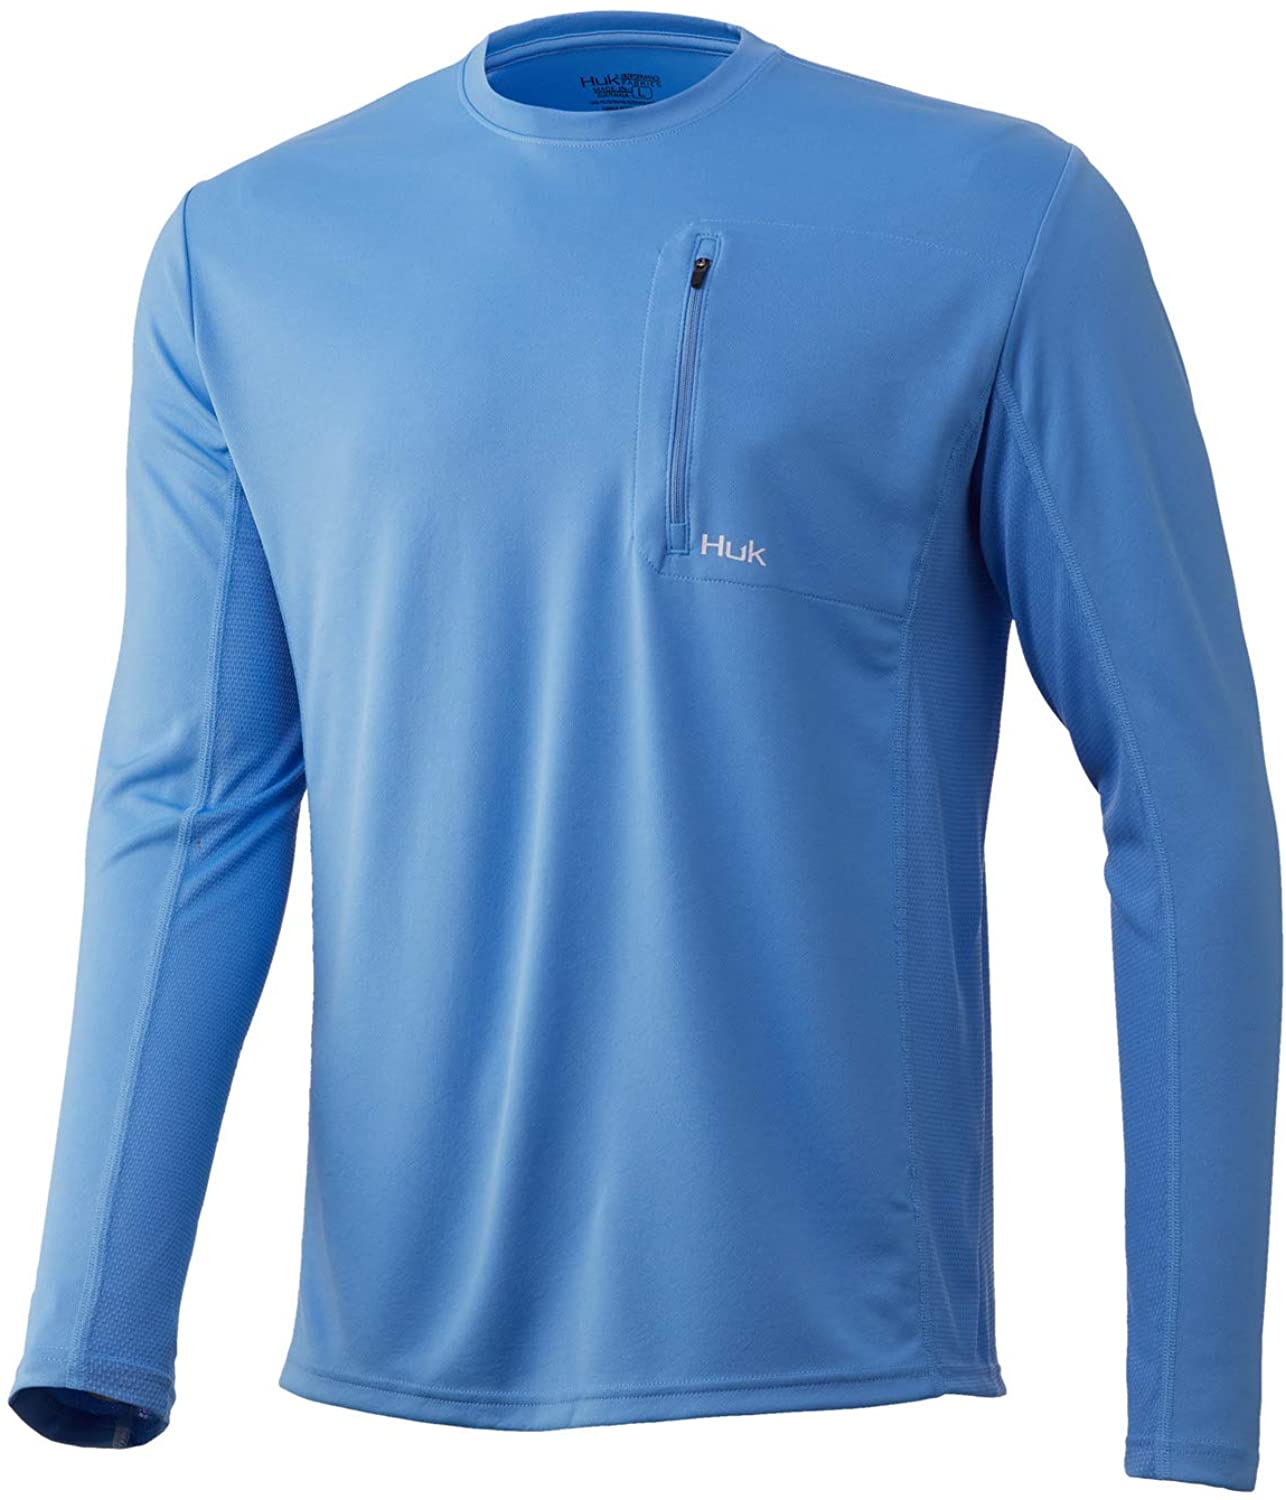 Men's Huk Icon X Pocket Long Sleeve Shirt in Carolina Blue from the front